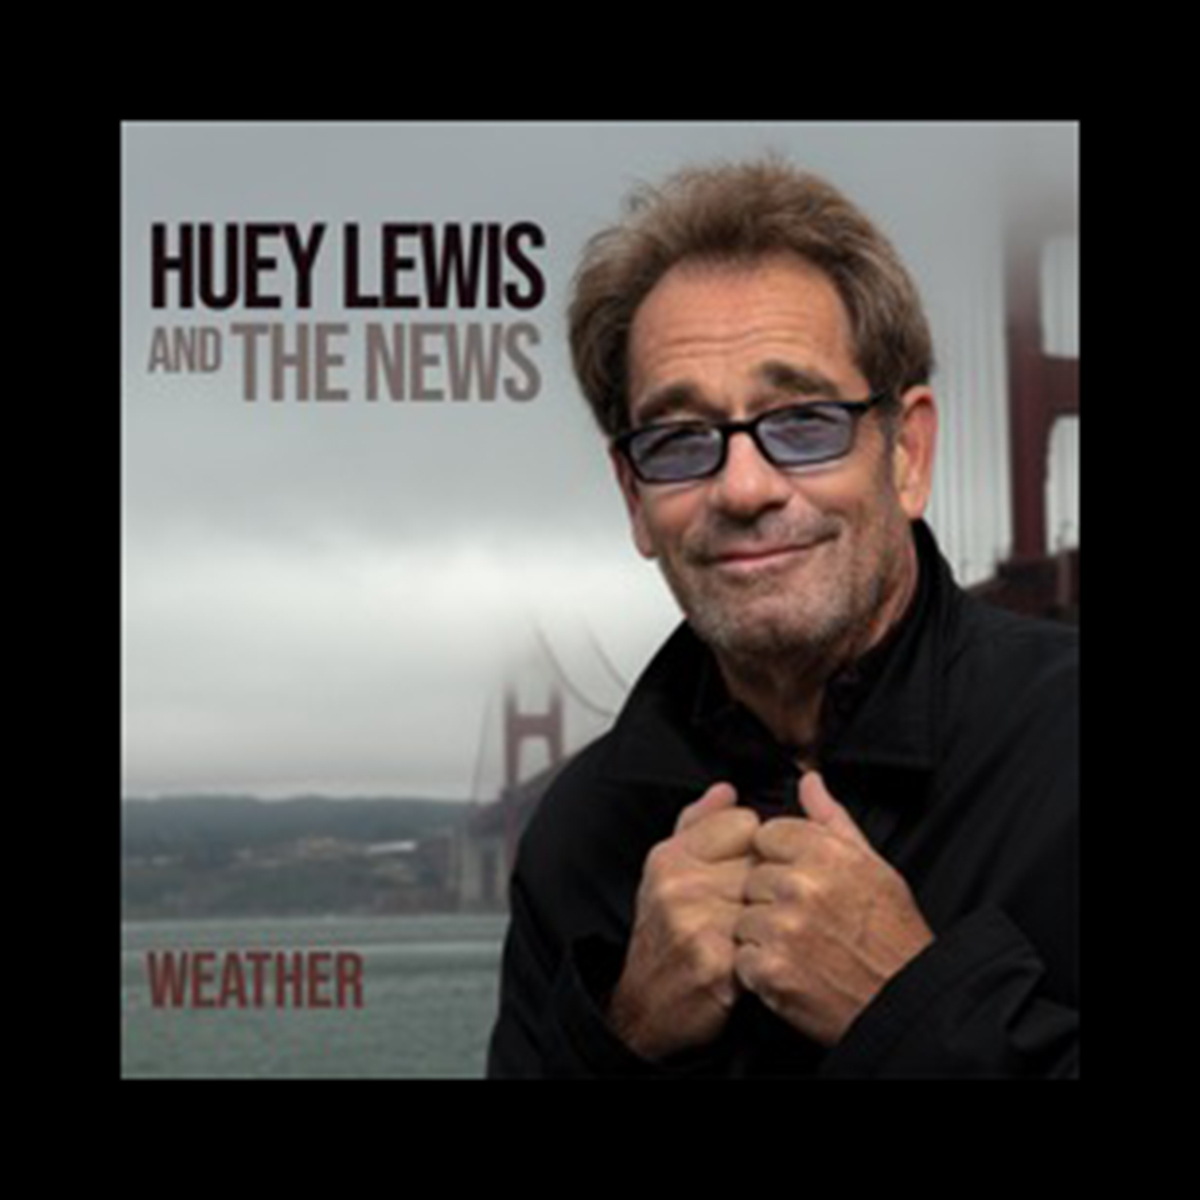 Huey Lewis & The News Release “Weather”, Their First Album Of Original New Music In Nearly 20 Years